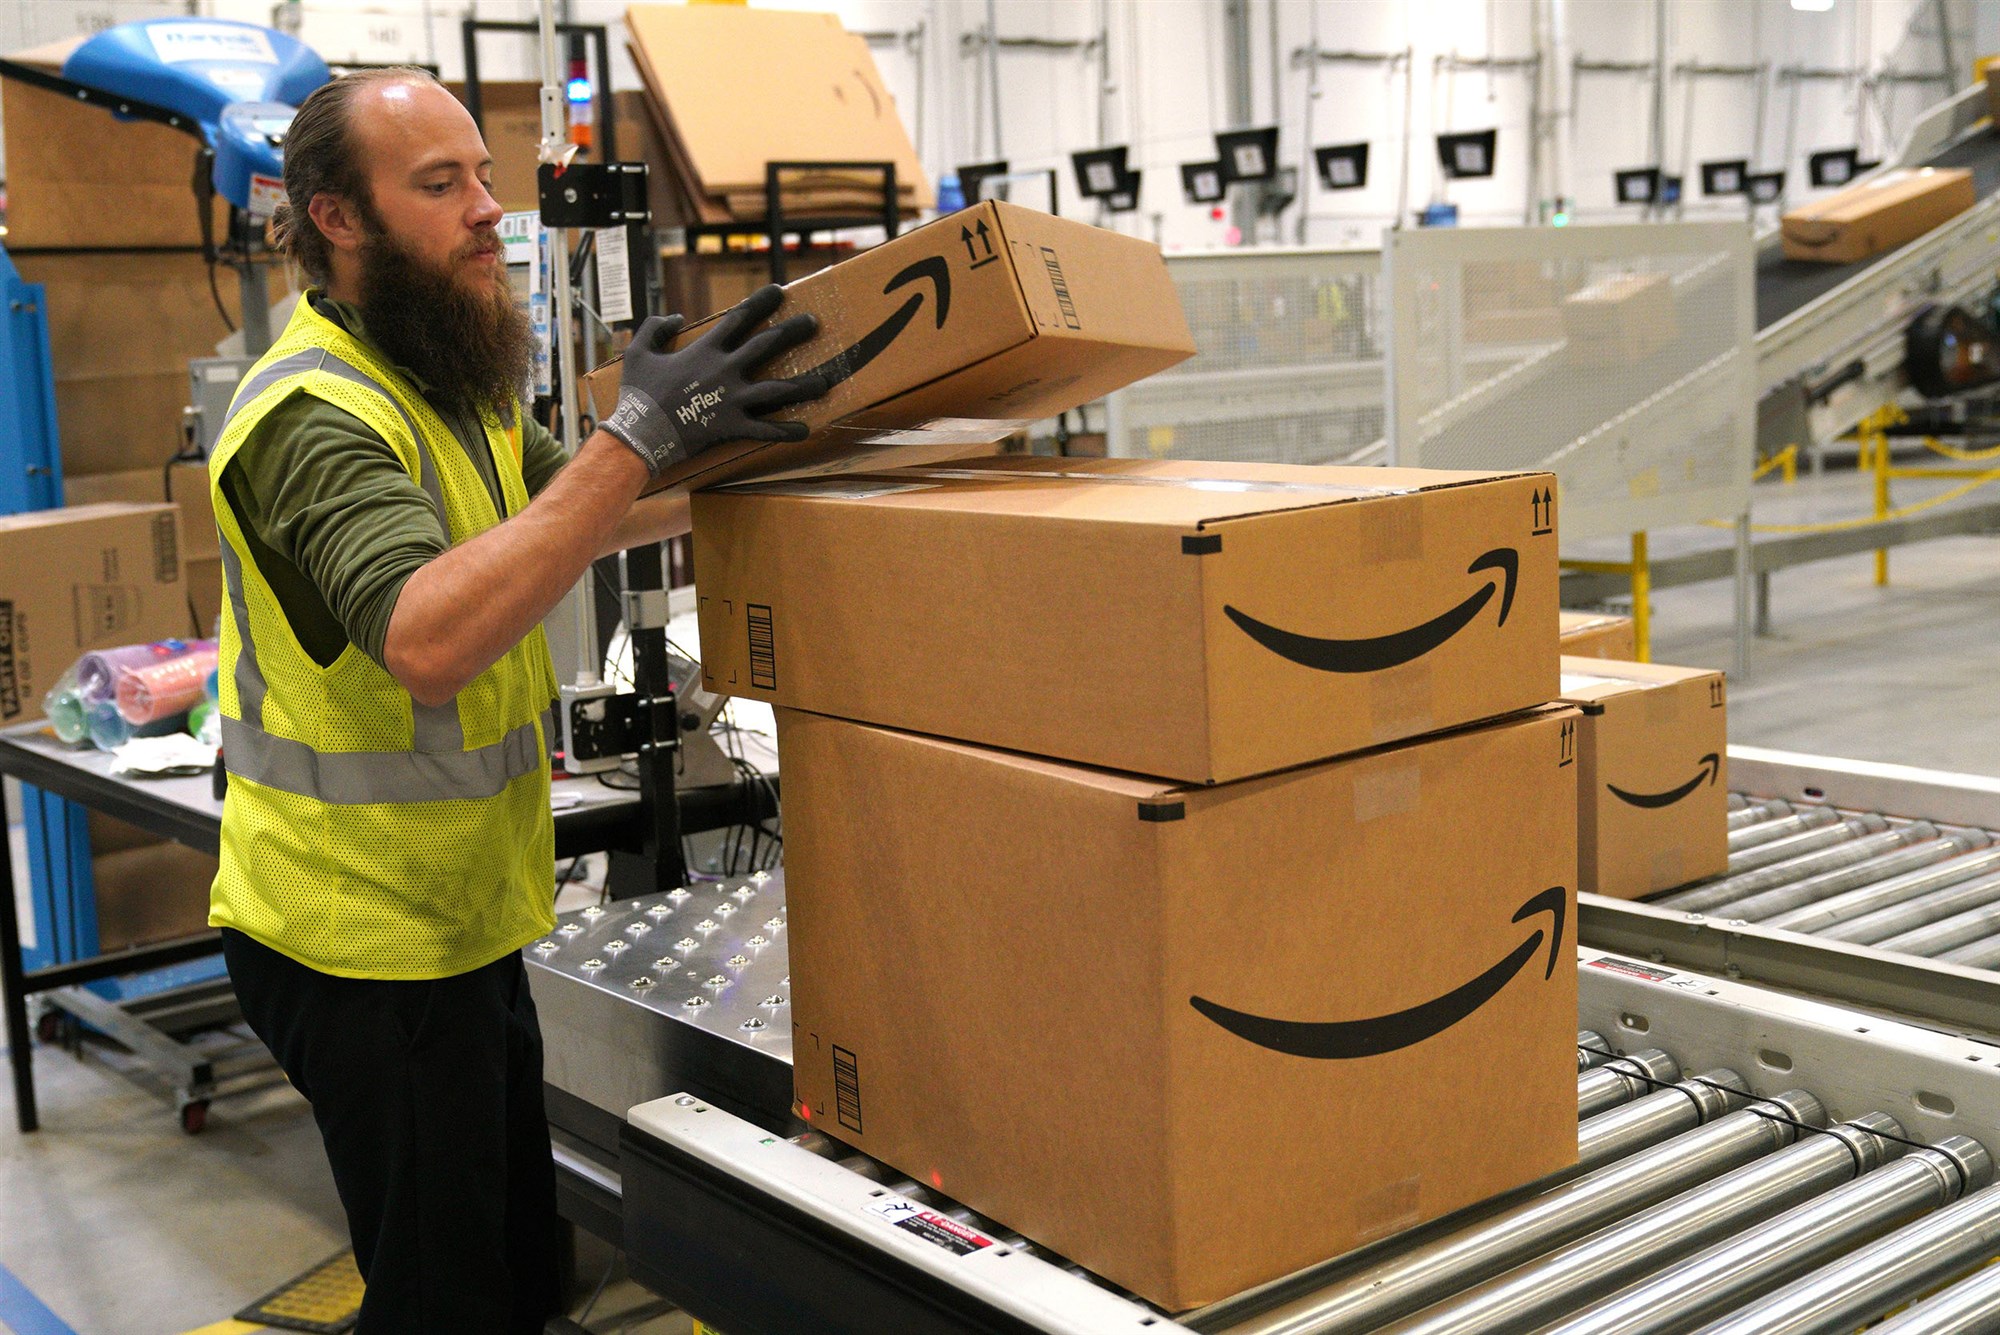 Amazon pledges minimum wage of $15 an hour for all U.S. workers